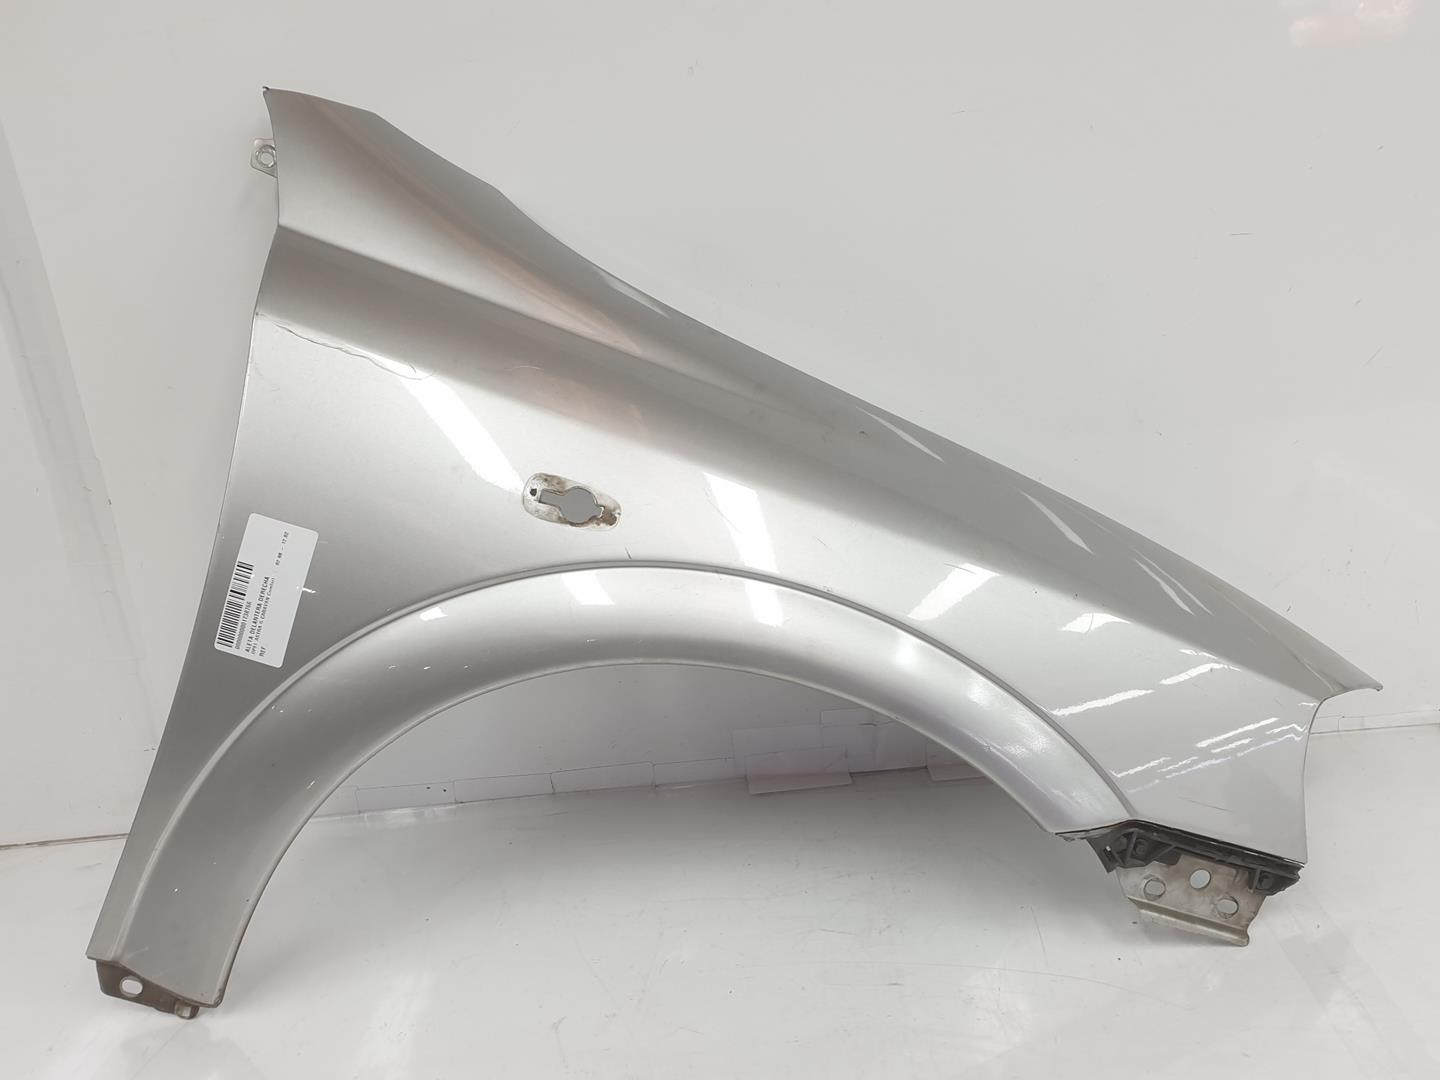 OPEL Astra H (2004-2014) Front Right Fender 93190358, 93190358, COLORGRIS82L 19830184